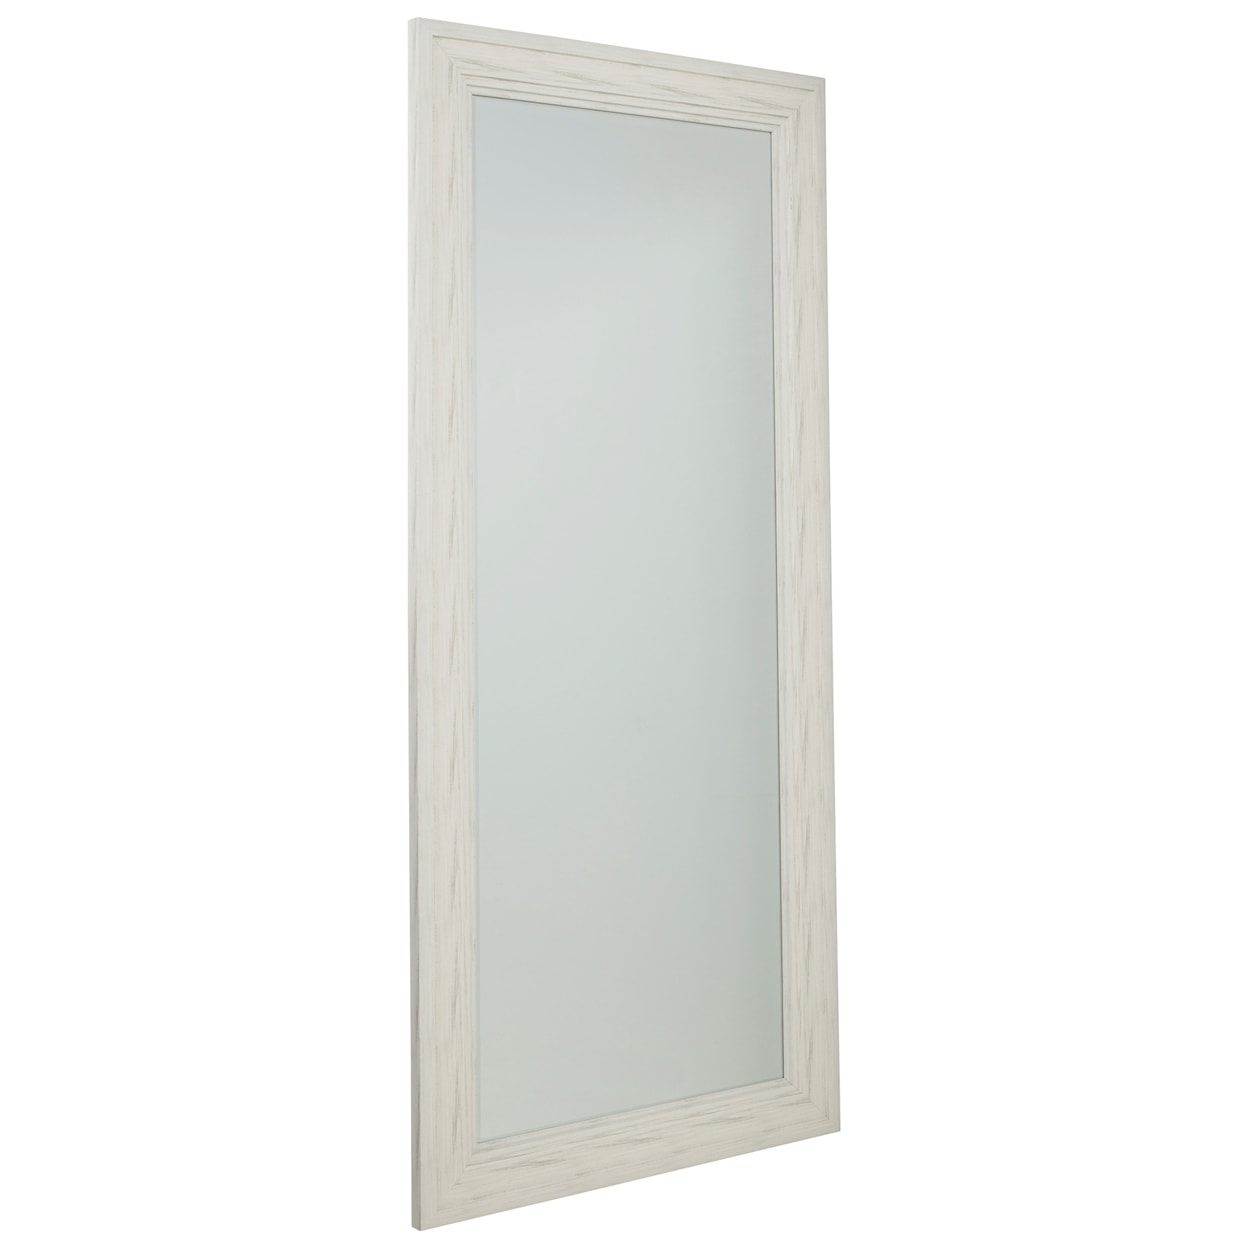 Signature Design by Ashley Accent Mirrors Jacee Antique White Floor Mirror